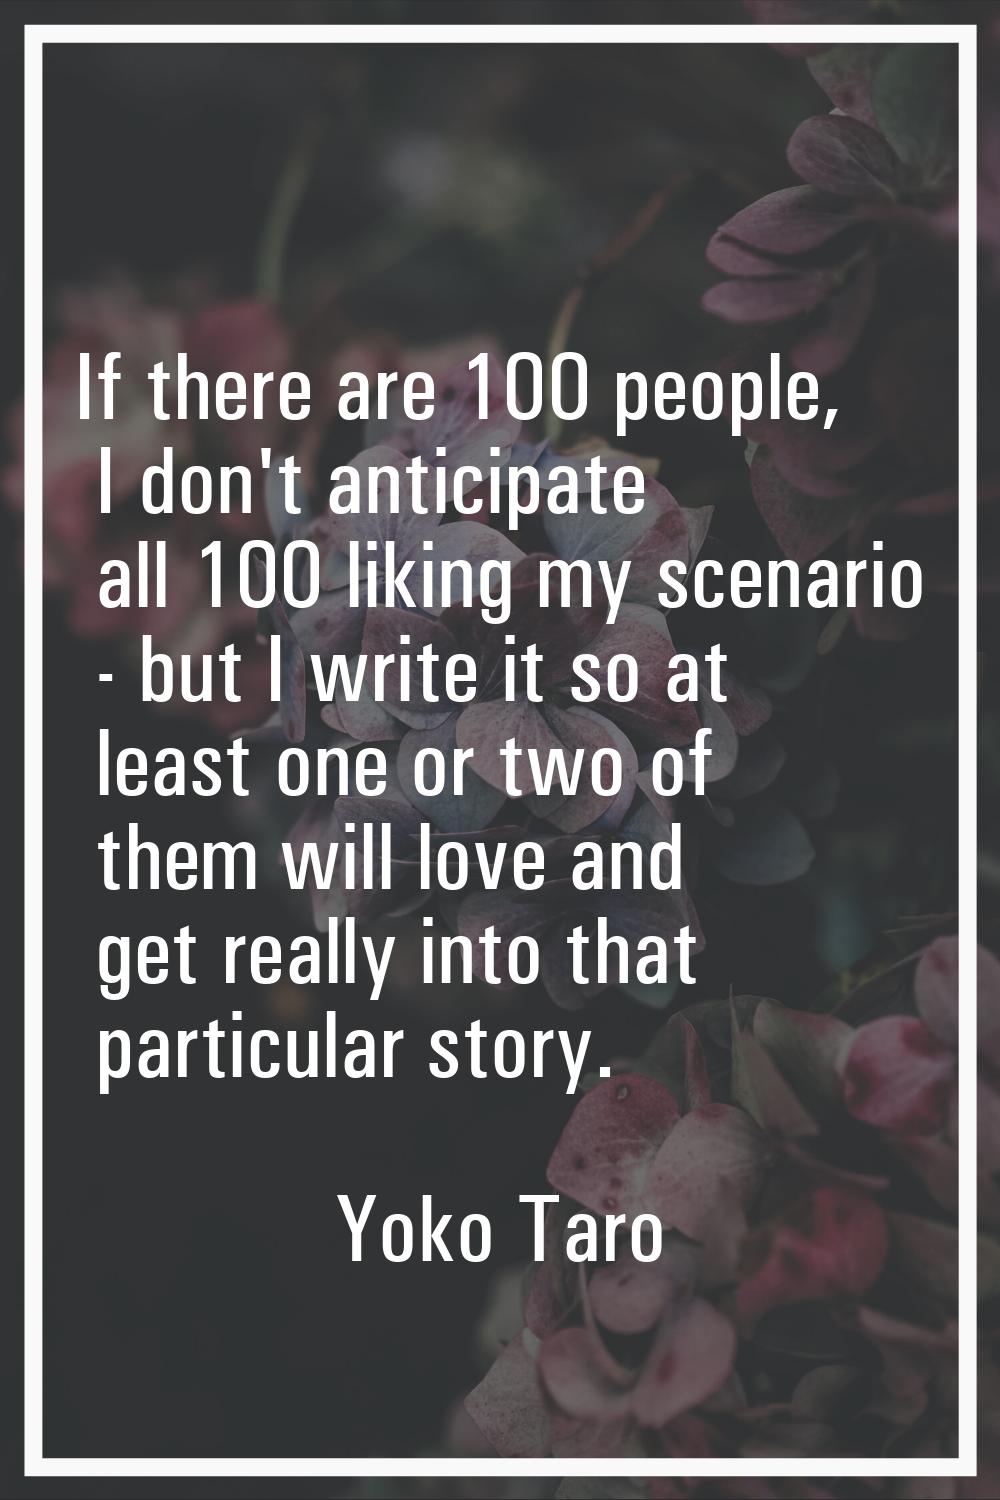 If there are 100 people, I don't anticipate all 100 liking my scenario - but I write it so at least